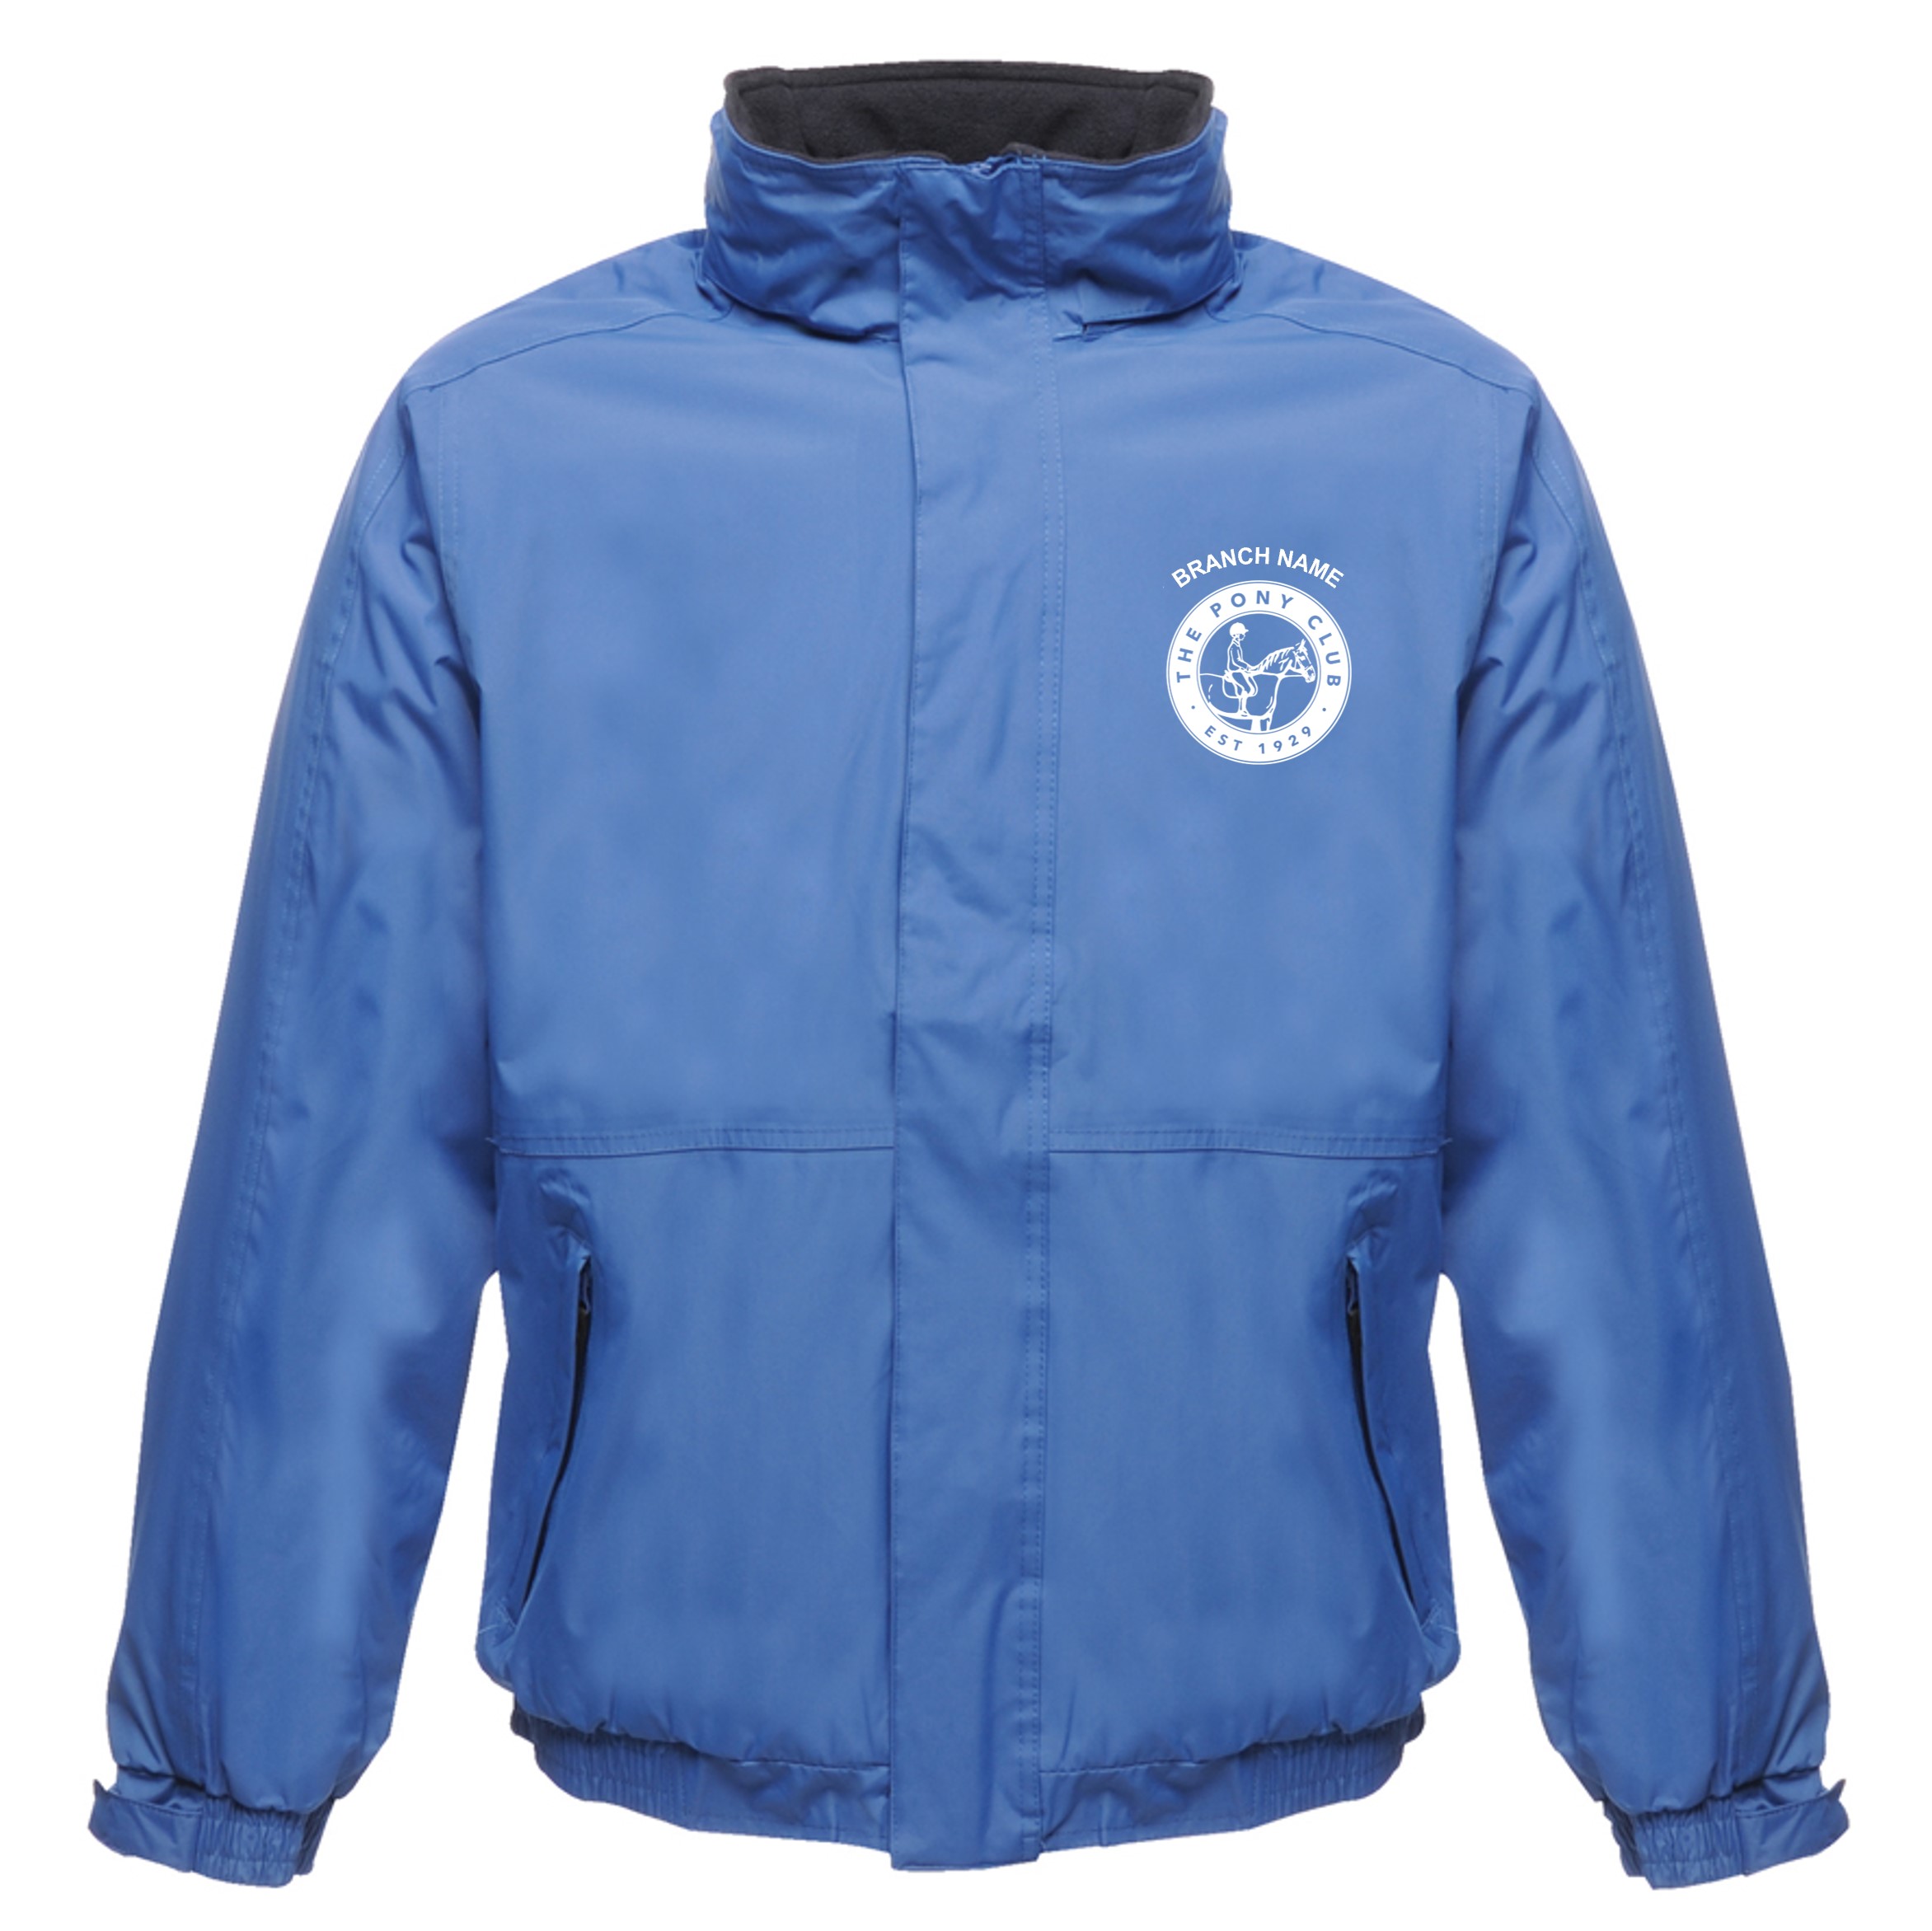 Pony Club Adult's Waterproof Insulated Jacket - The Embroidery Shed